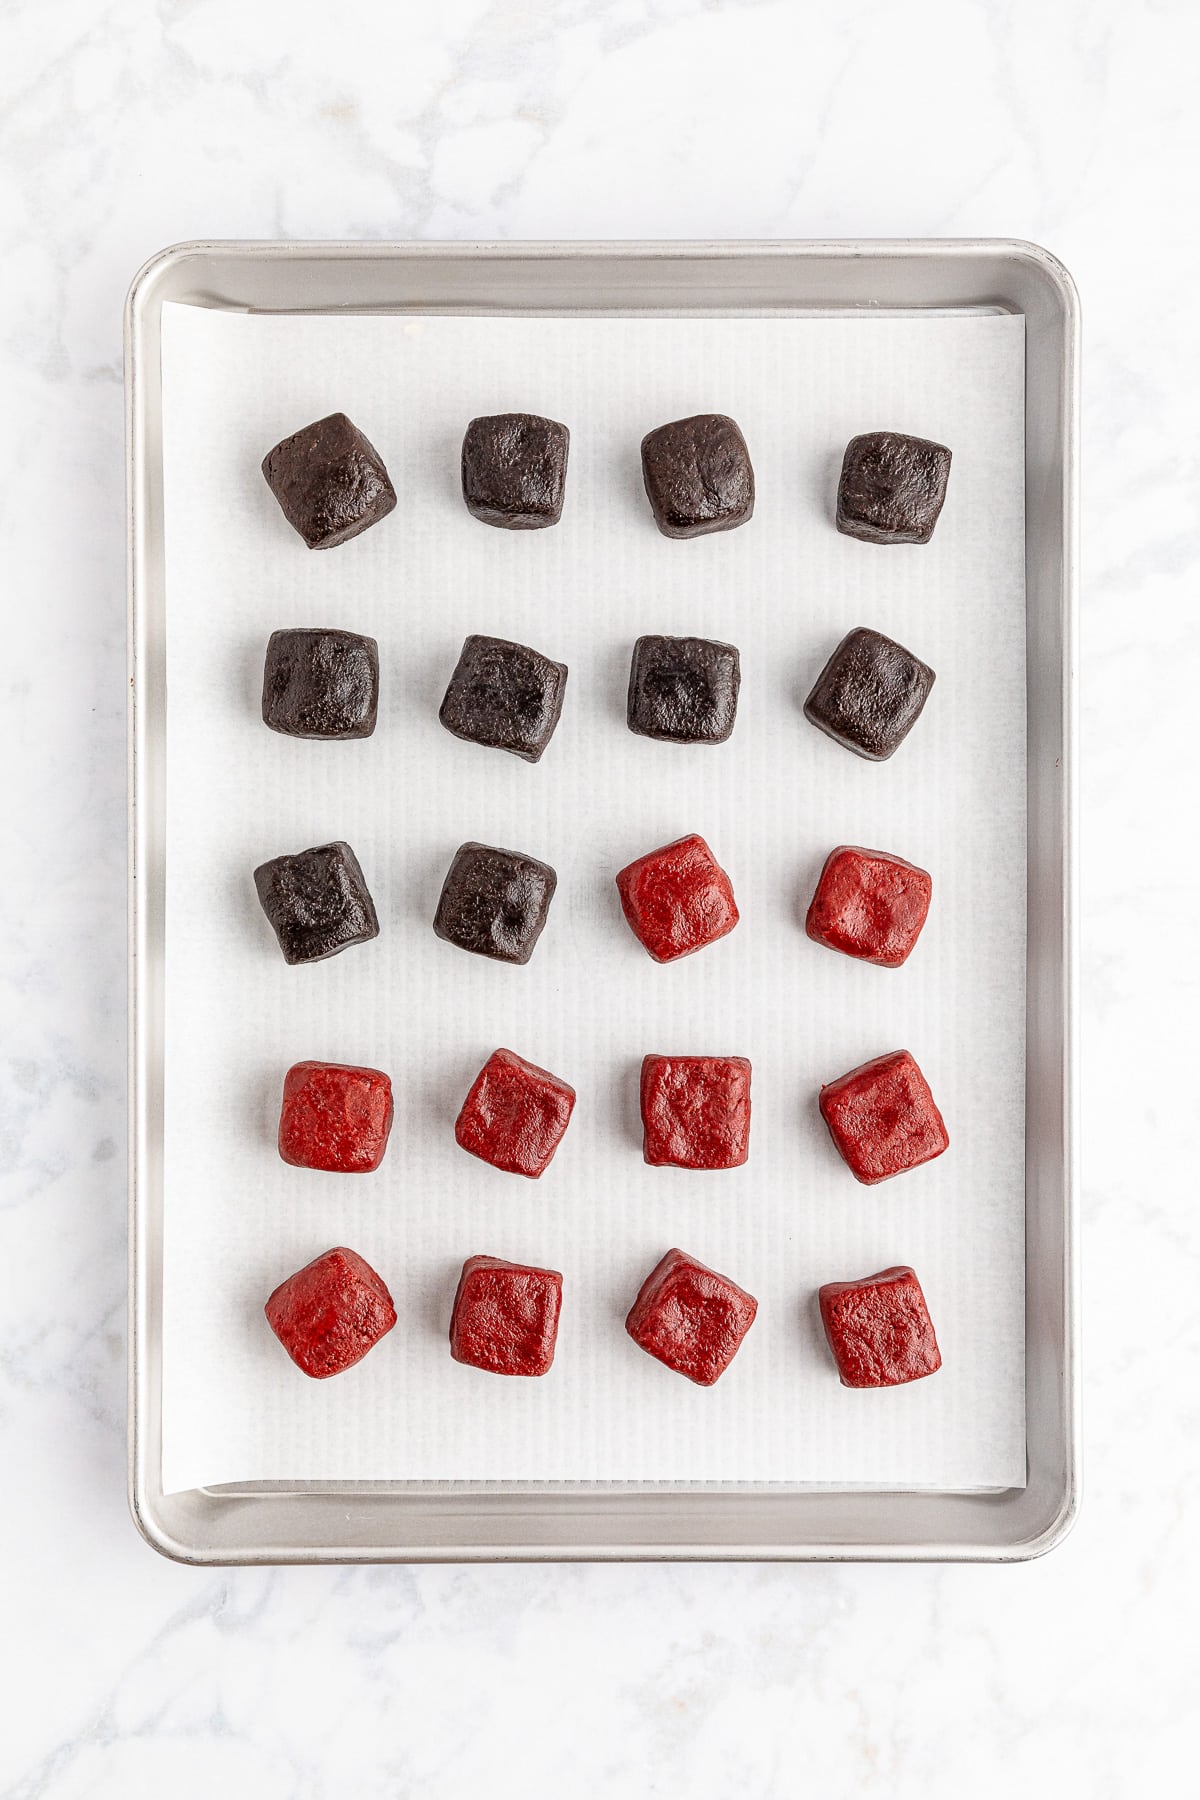 A baking sheet with square truffle dough portioned out and shaped into squares.